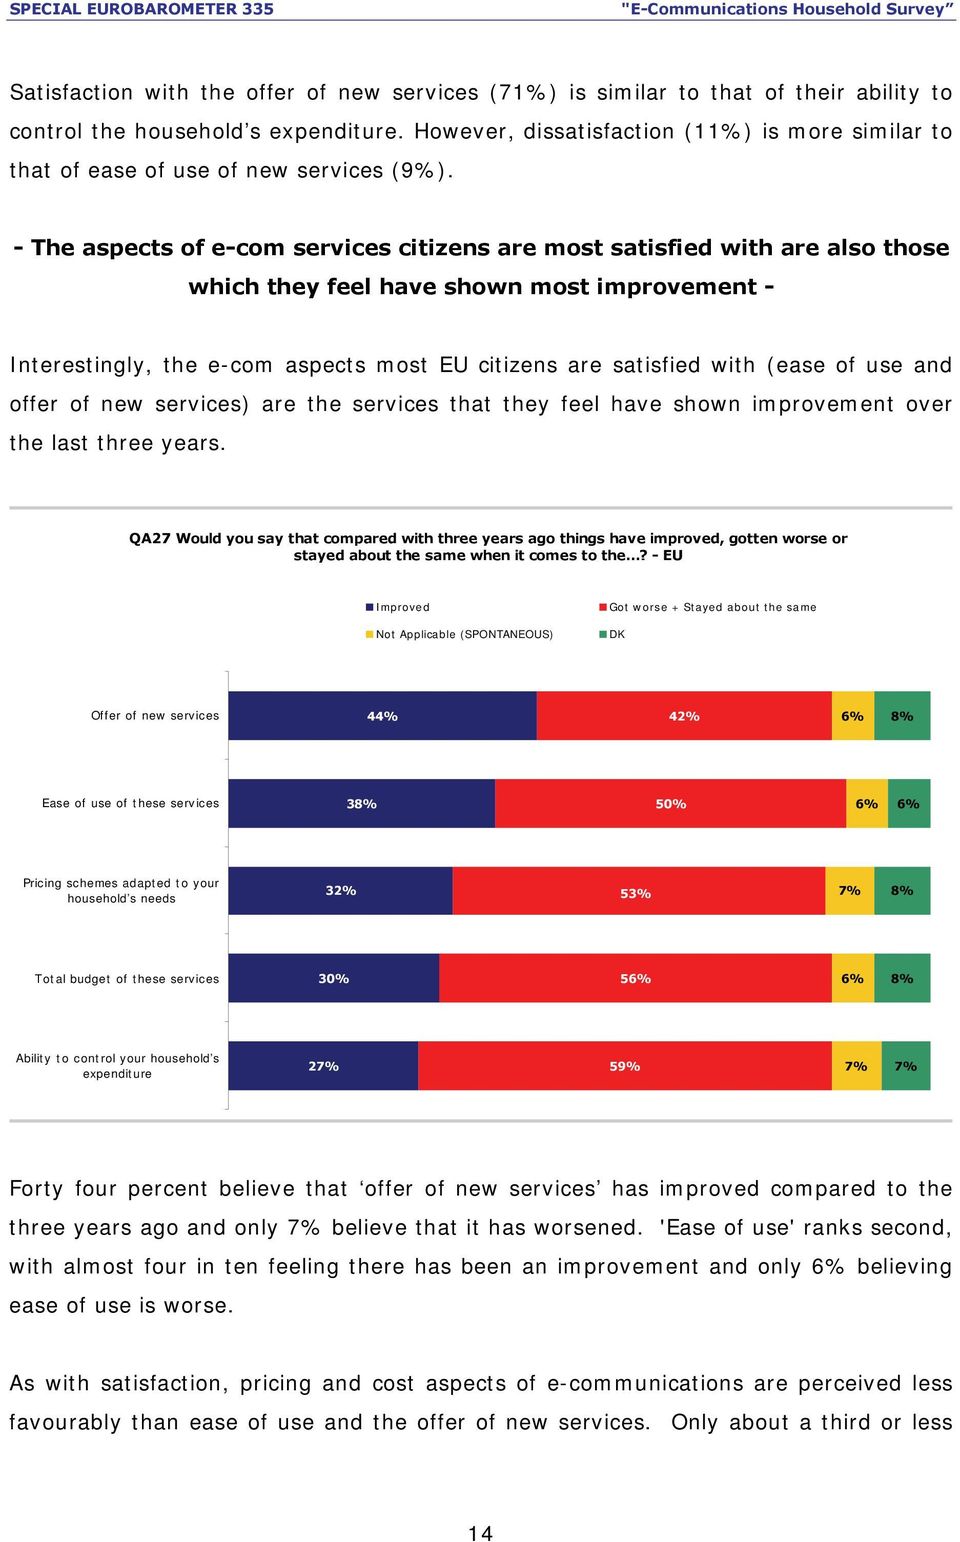 - The aspects of e-com services citizens are most satisfied with are also those which they feel have shown most improvement - Interestingly, the e-com aspects most EU citizens are satisfied with